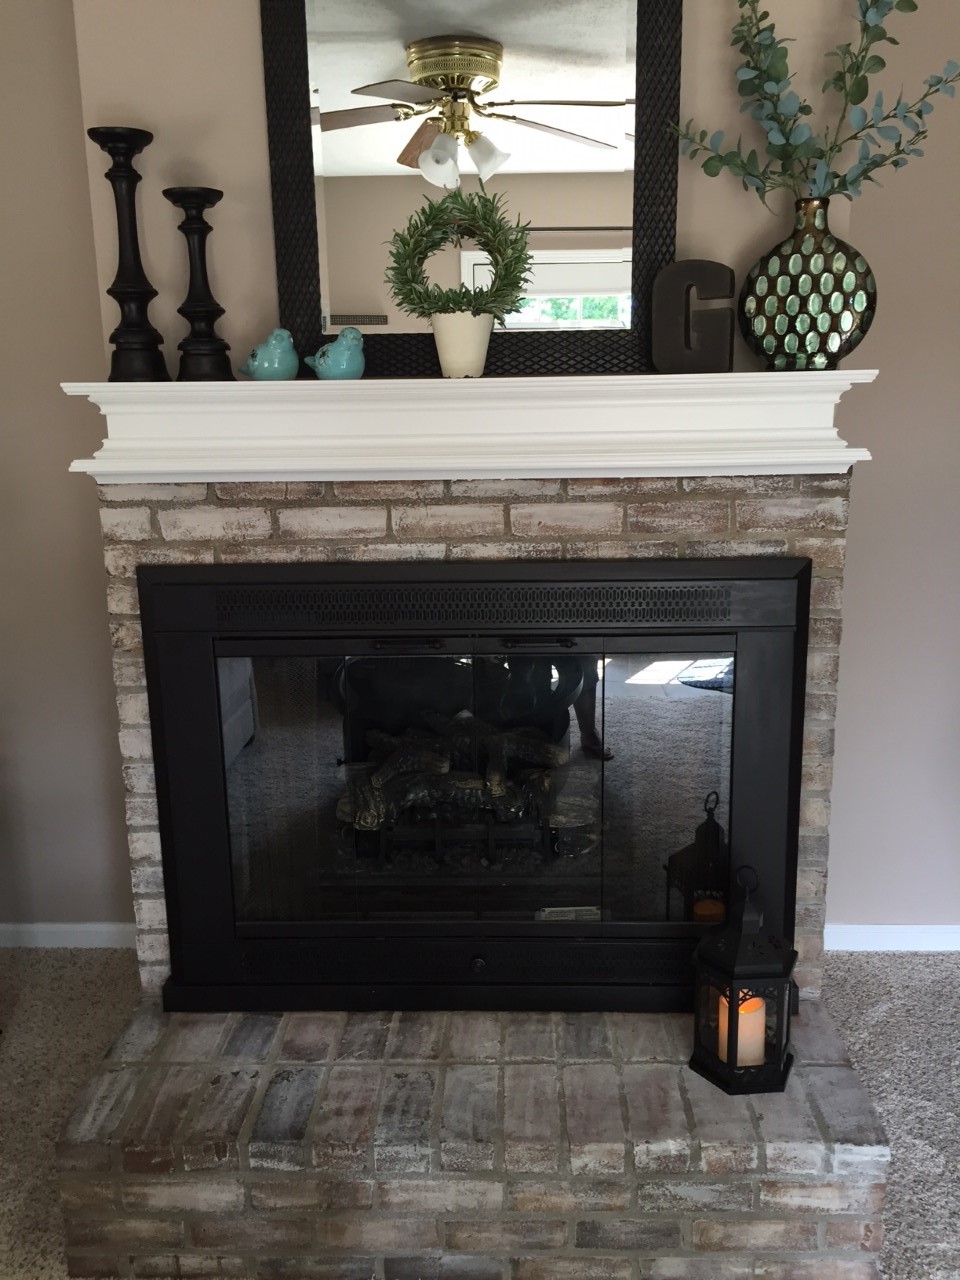 How to Whitewash Brick and Paint your Brassy Fireplace